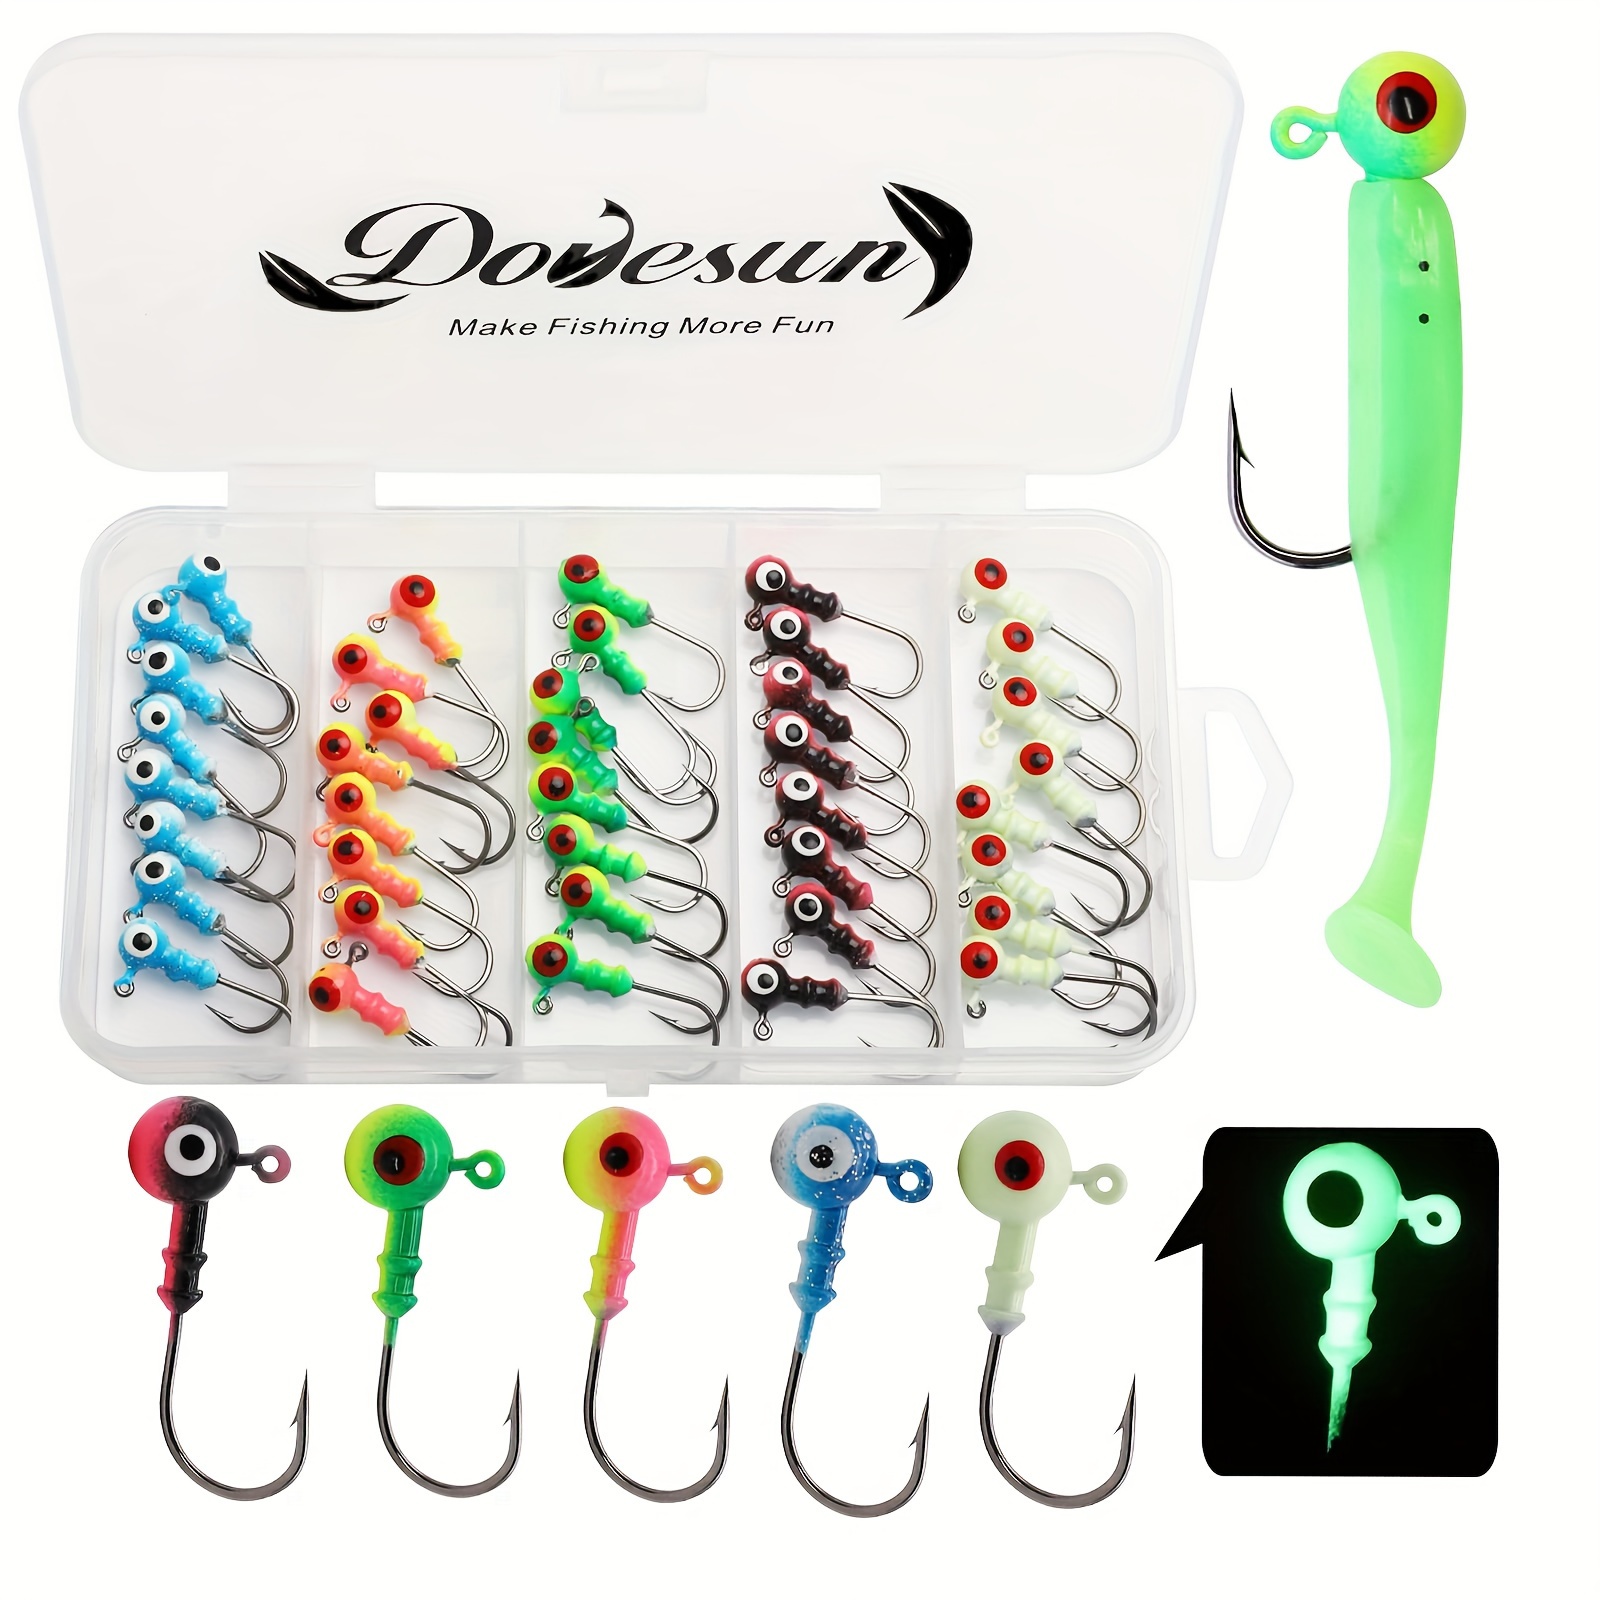 Dovesun 15 40pcs Jig Heads For Fishing Painted Jigheads With 3D